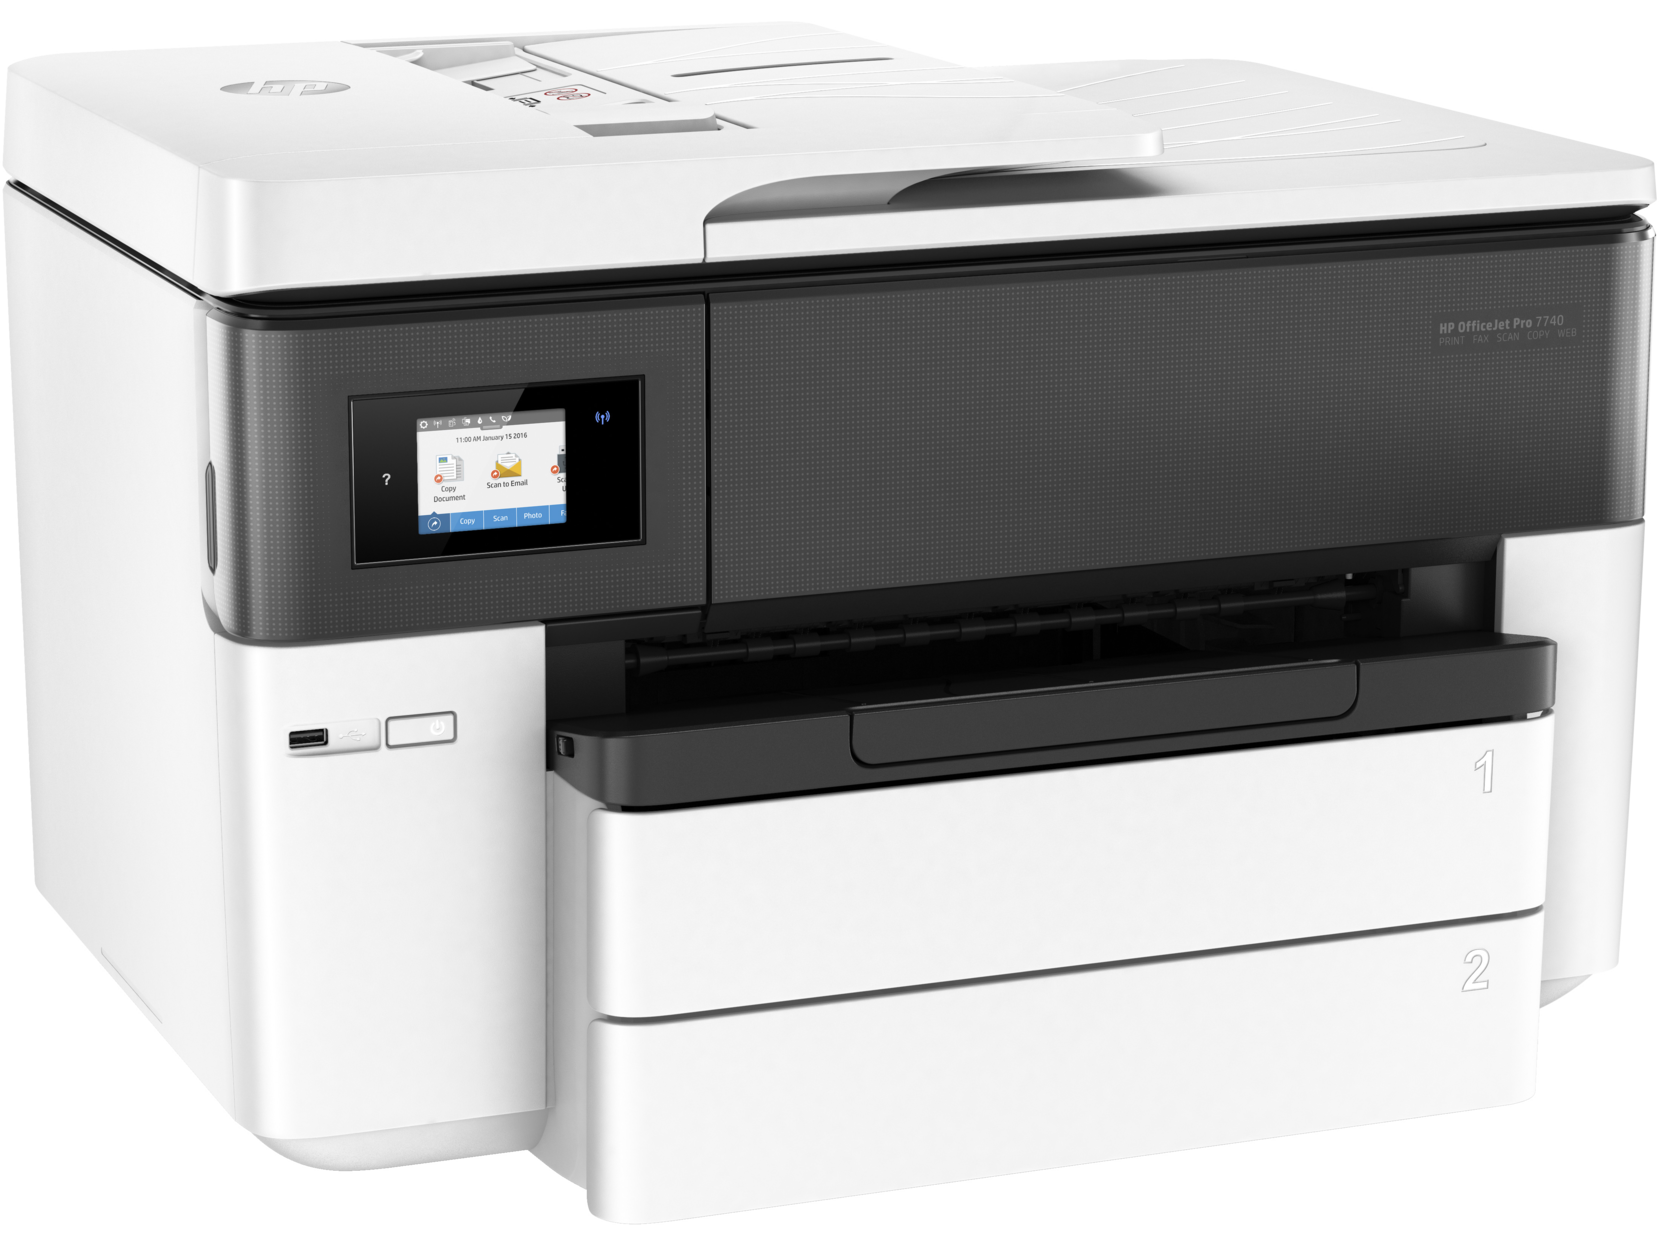 OfficeJet Pro 7740 Wide Format Wireless All-In-One Thermal Inkjet Printer - Print, Copy, Scan, Fax - image 4 of 7